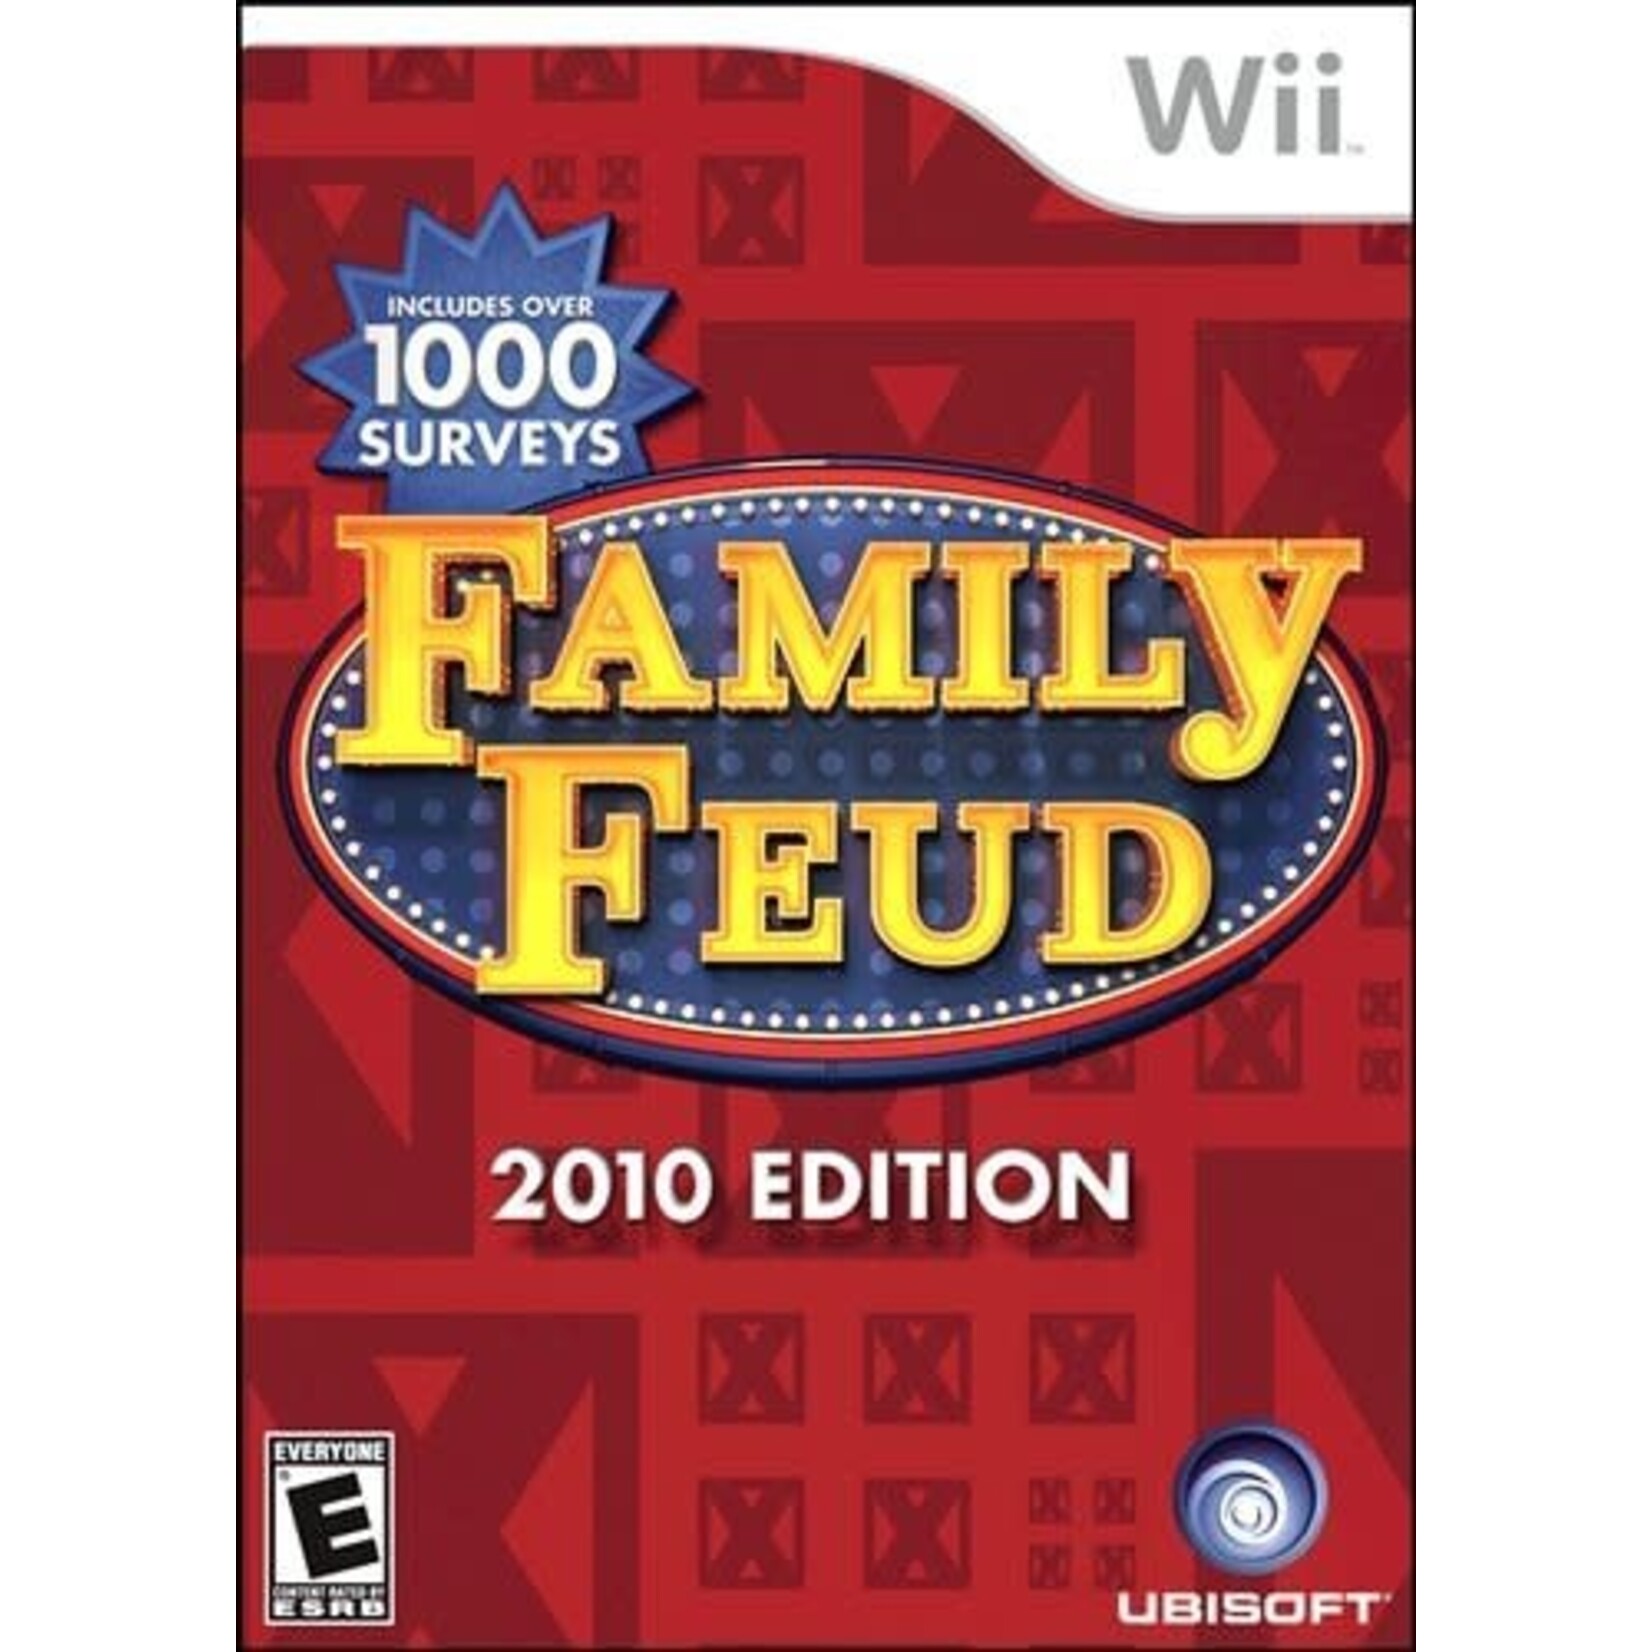 WIIUSD-Family Feud 2010 Edition